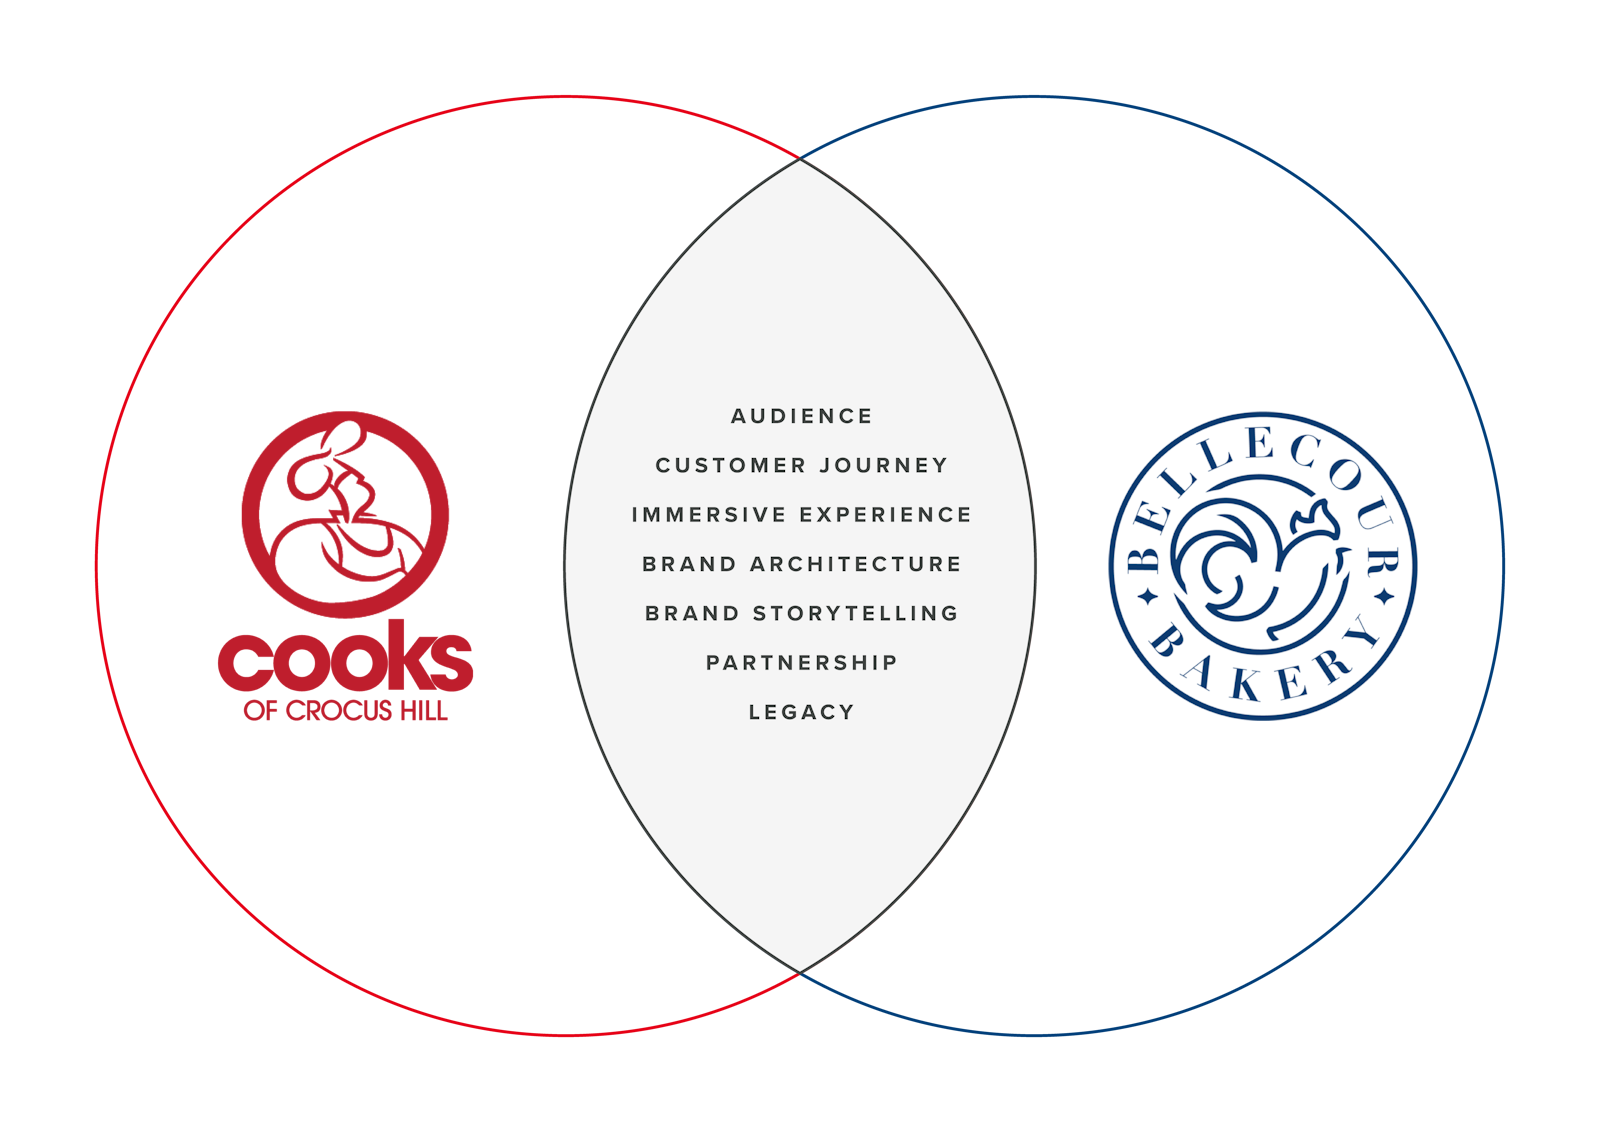 A Venn Diagram of comparing Cooks of Crocus Hill and Bellecour Bakery.